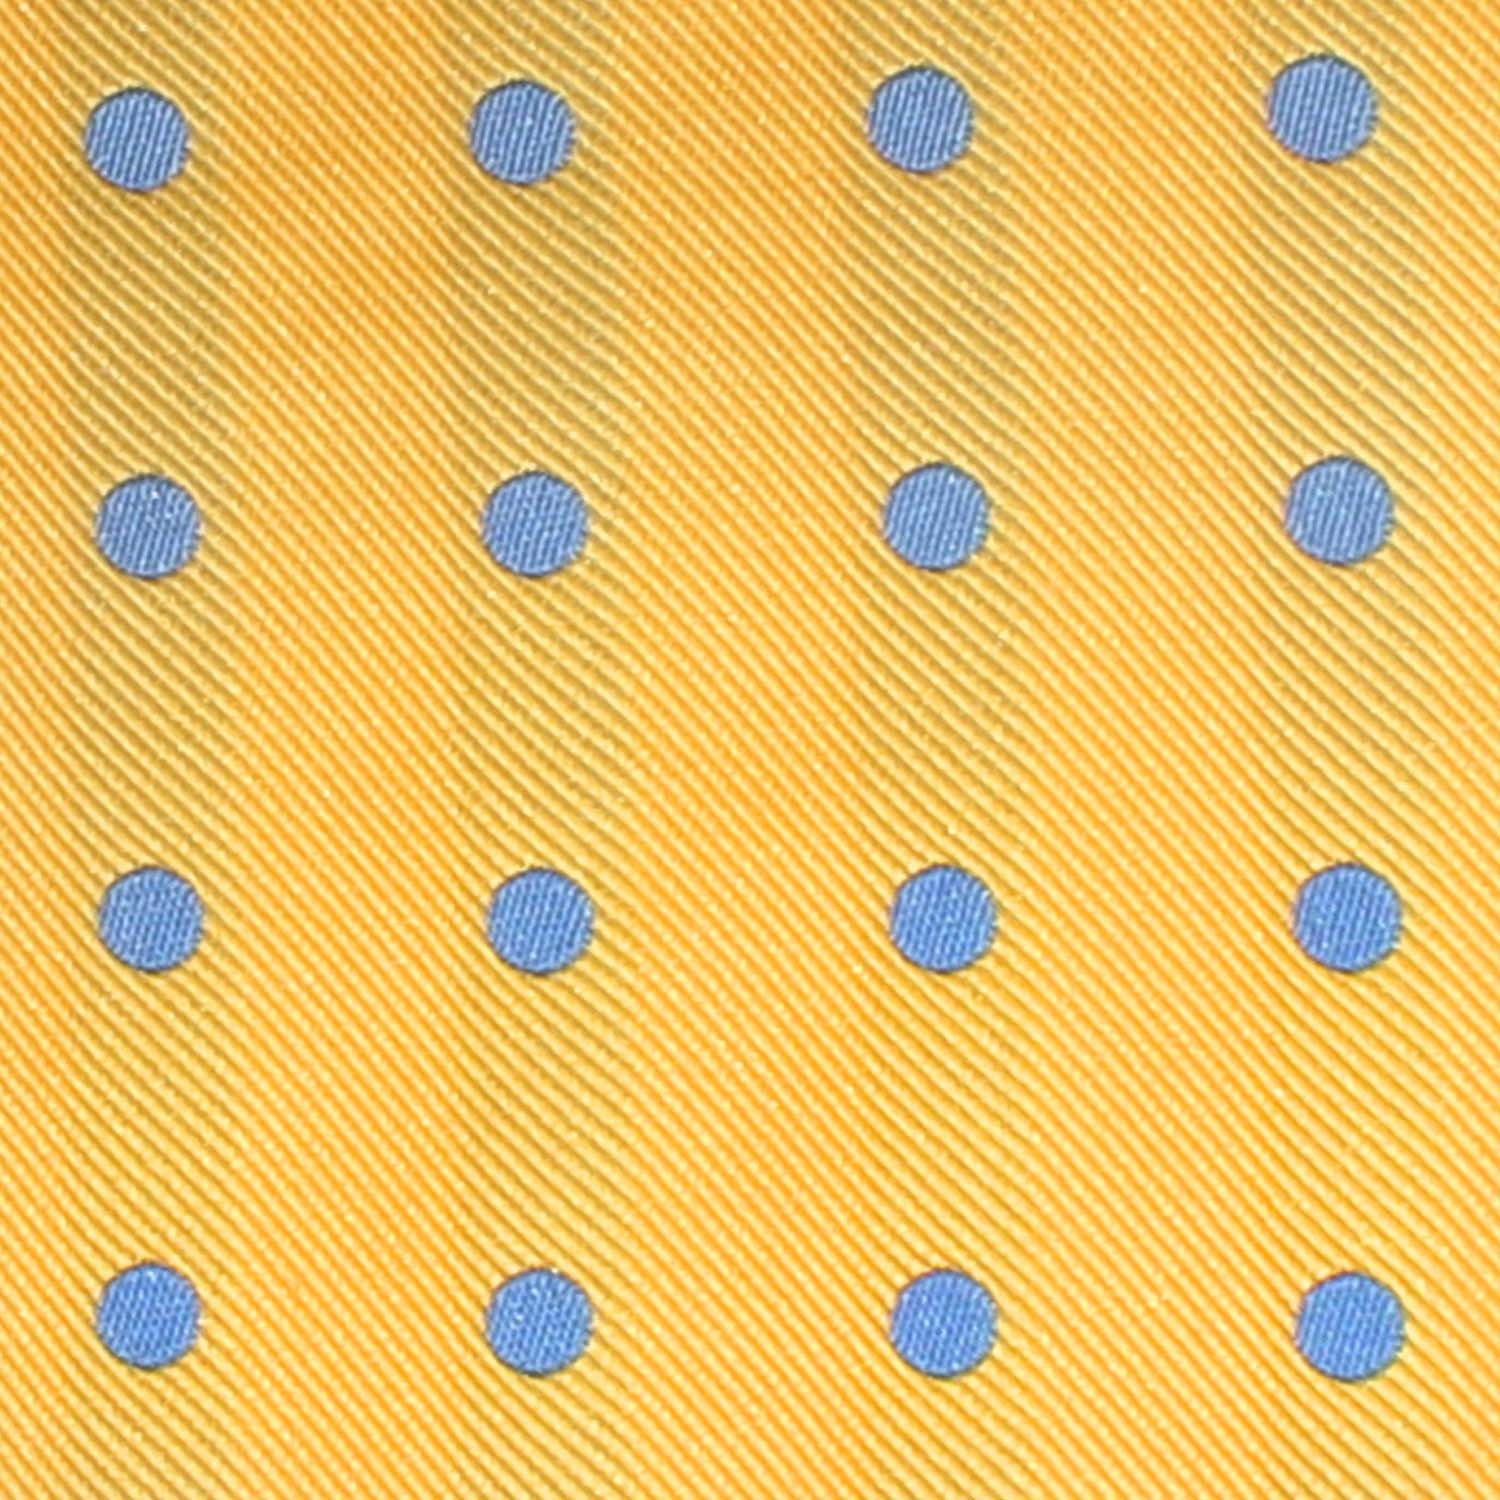 Yellow with Light Blue Polka Dots Fabric Pocket Square X691Yellow with Light Blue Polka Dots Fabric Pocket Square X691